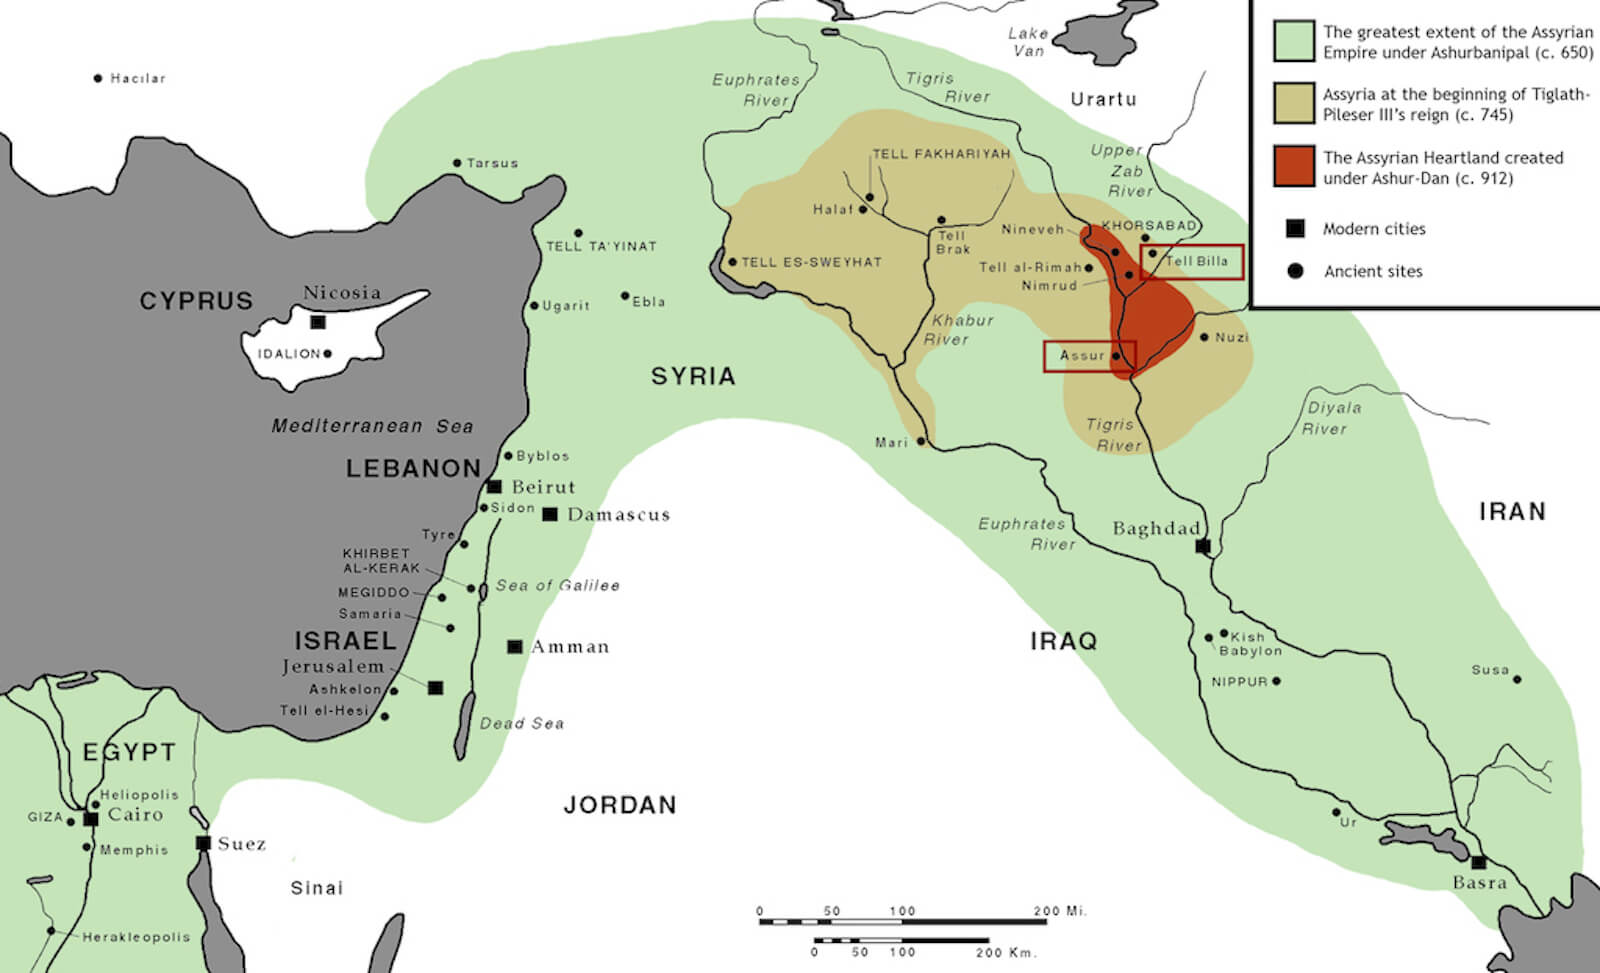 Assyria during its different phases of expansion (base map courtesy of ISAC’s online resources)